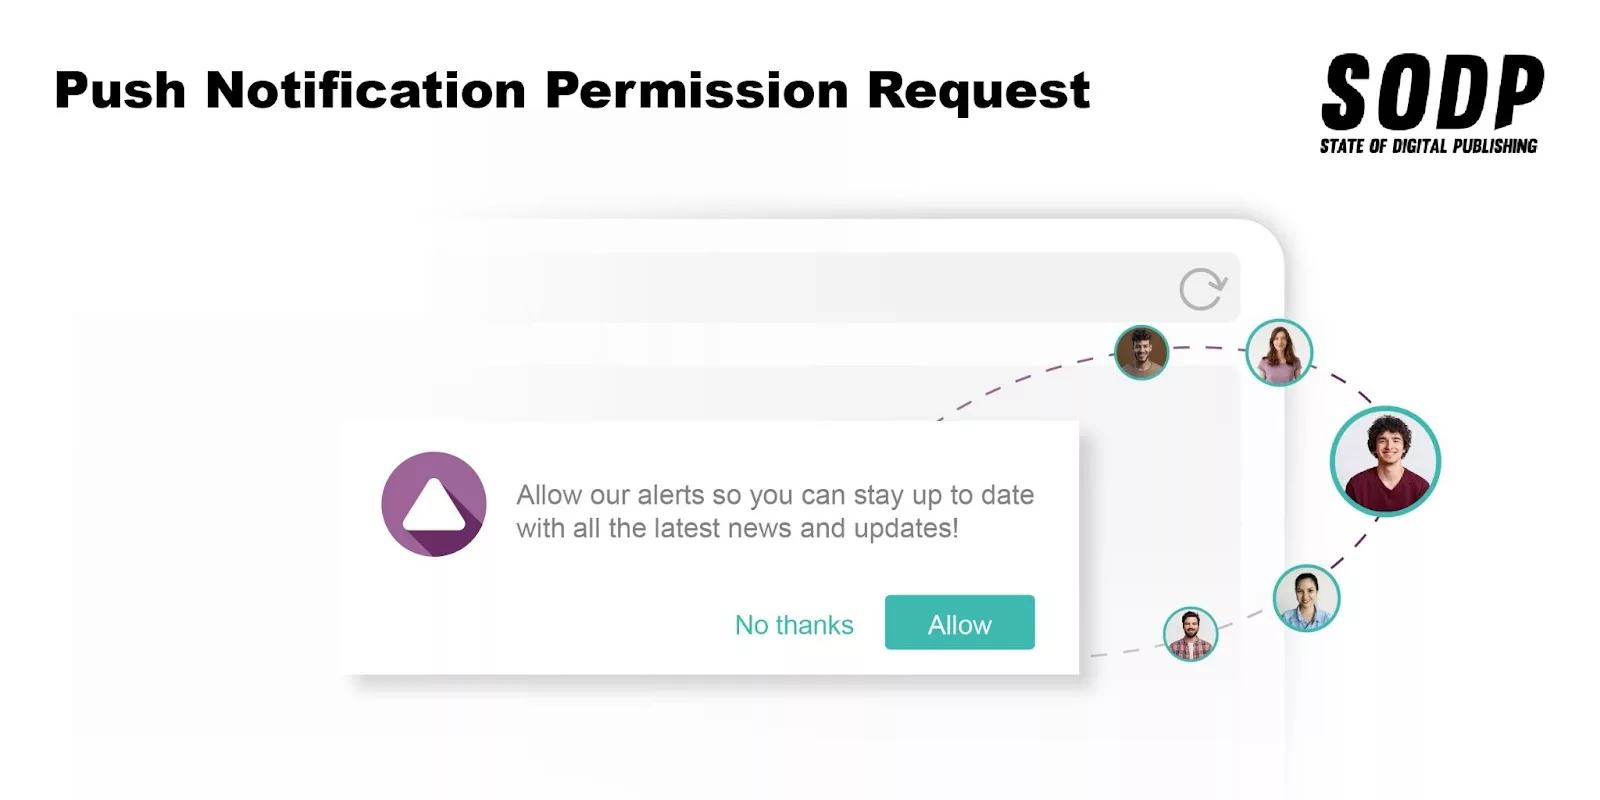 Always ask for permissions before enabling a push notification service.